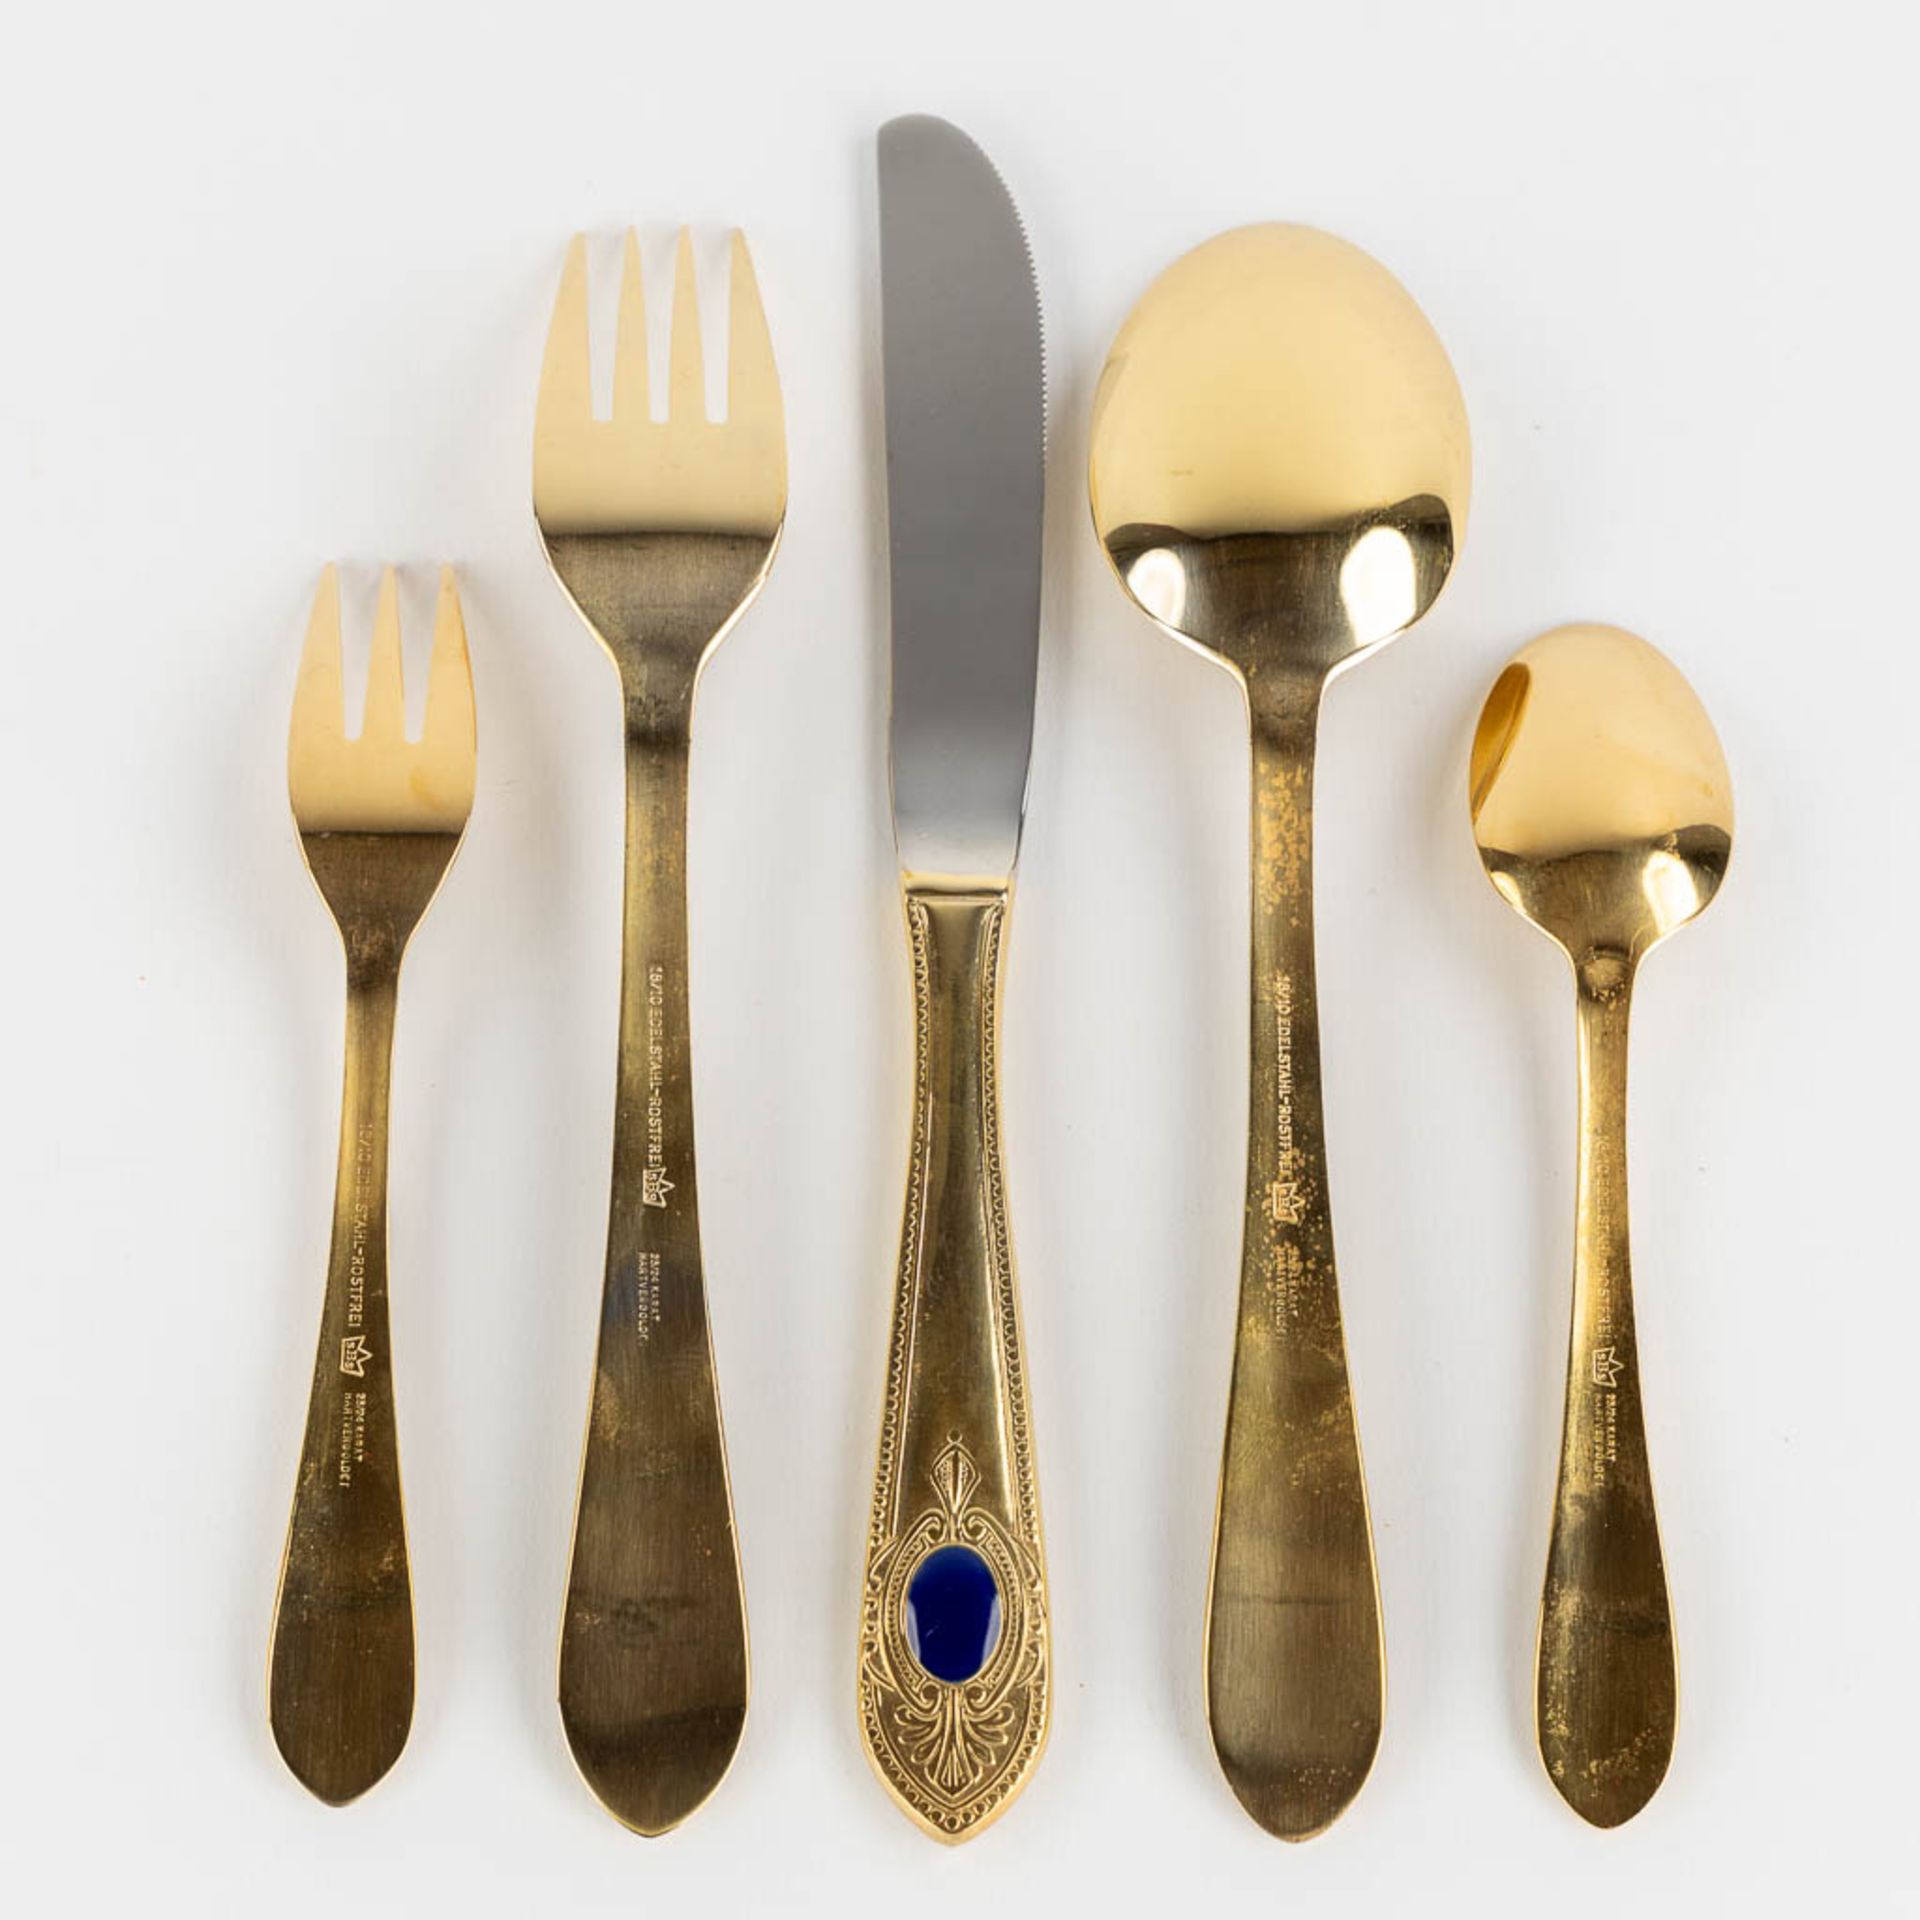 A gold-plated 'Bestecke Solingen' flatware cutlery set, made in Germany. (L:33 x W:45,5 x H:9,5 cm) - Image 7 of 11